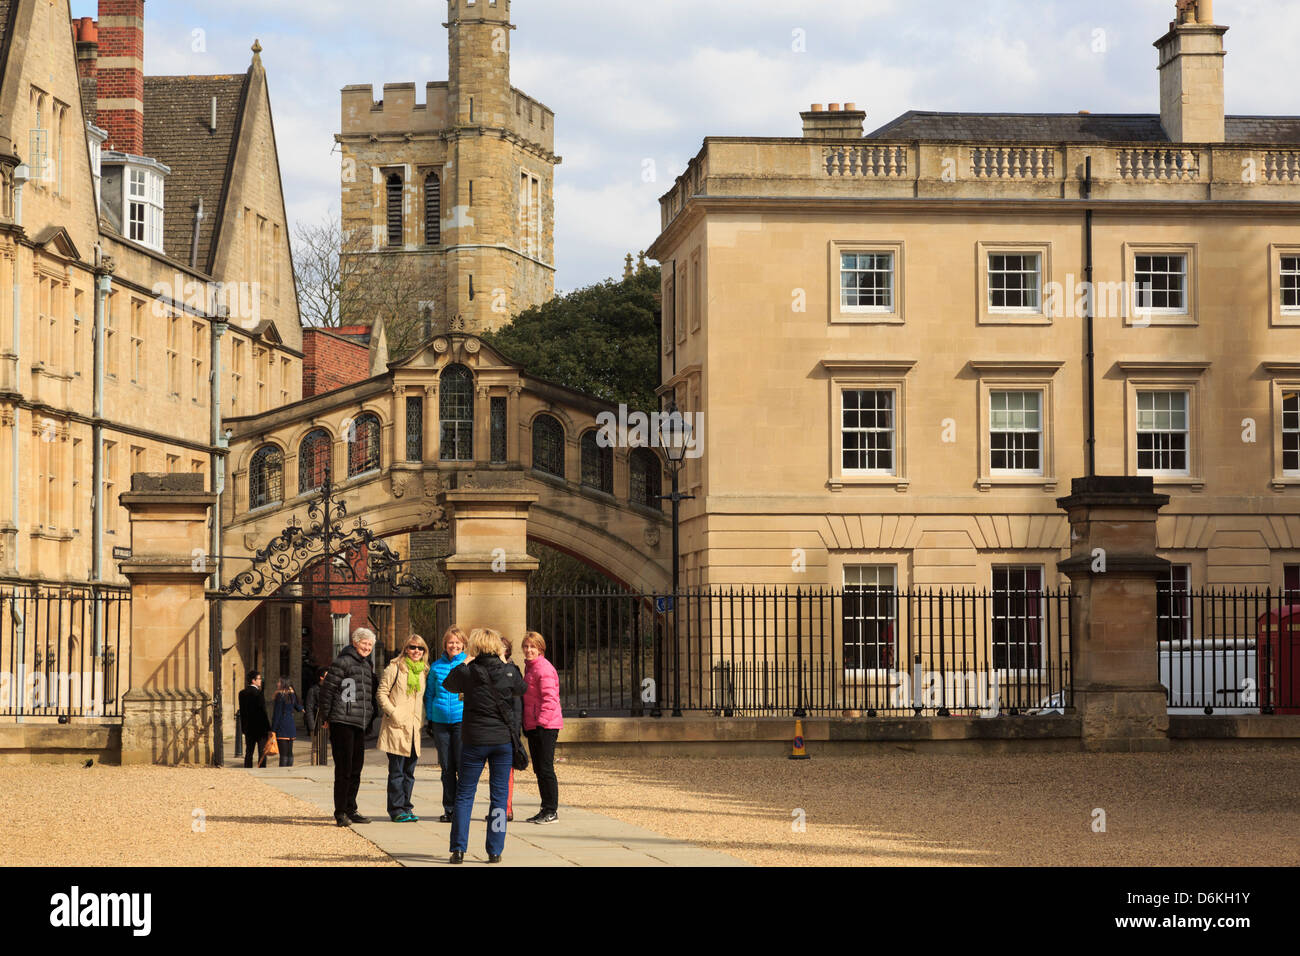 Tourists being photographed in front of the Bridge of Sighs and Hertford College in Oxford England UK Britain Stock Photo